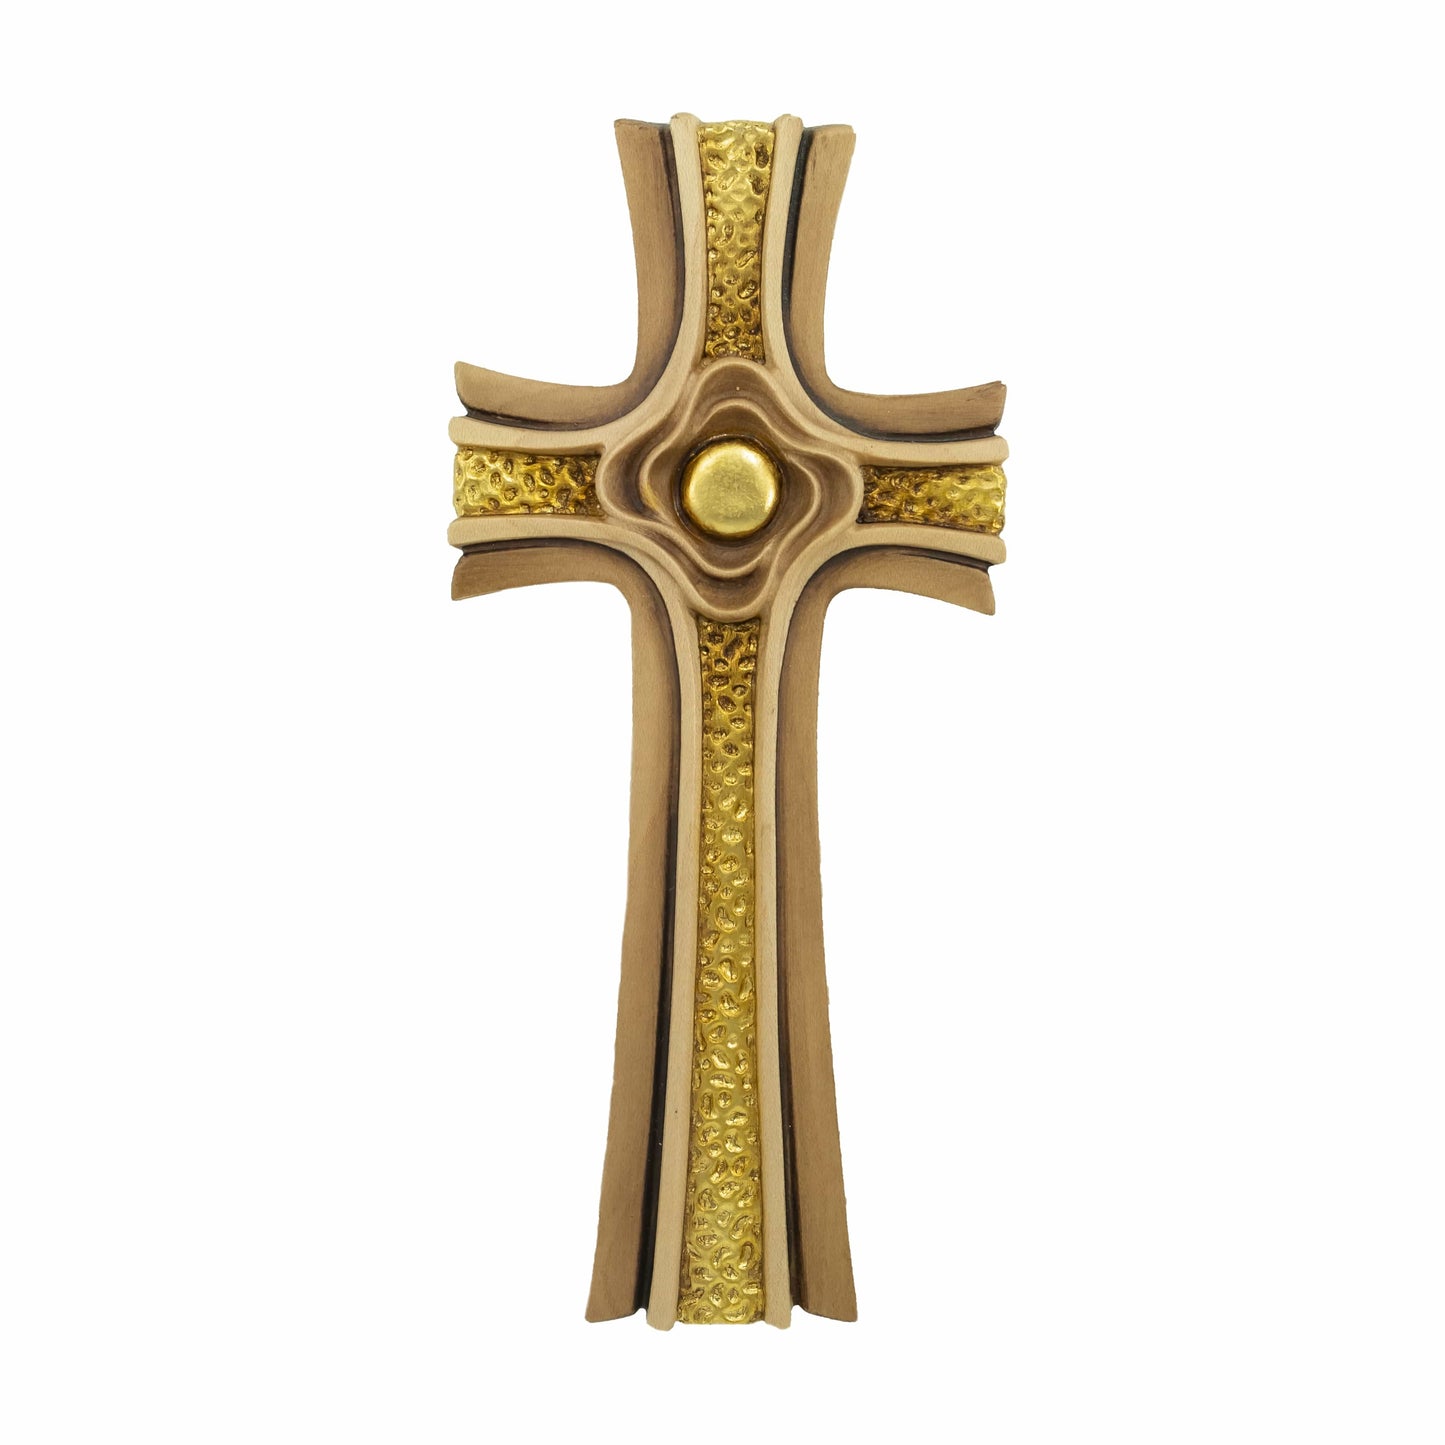 MONDO CATTOLICO 17 cm (6.69 in) Wooden Rose Cross With Golden Details